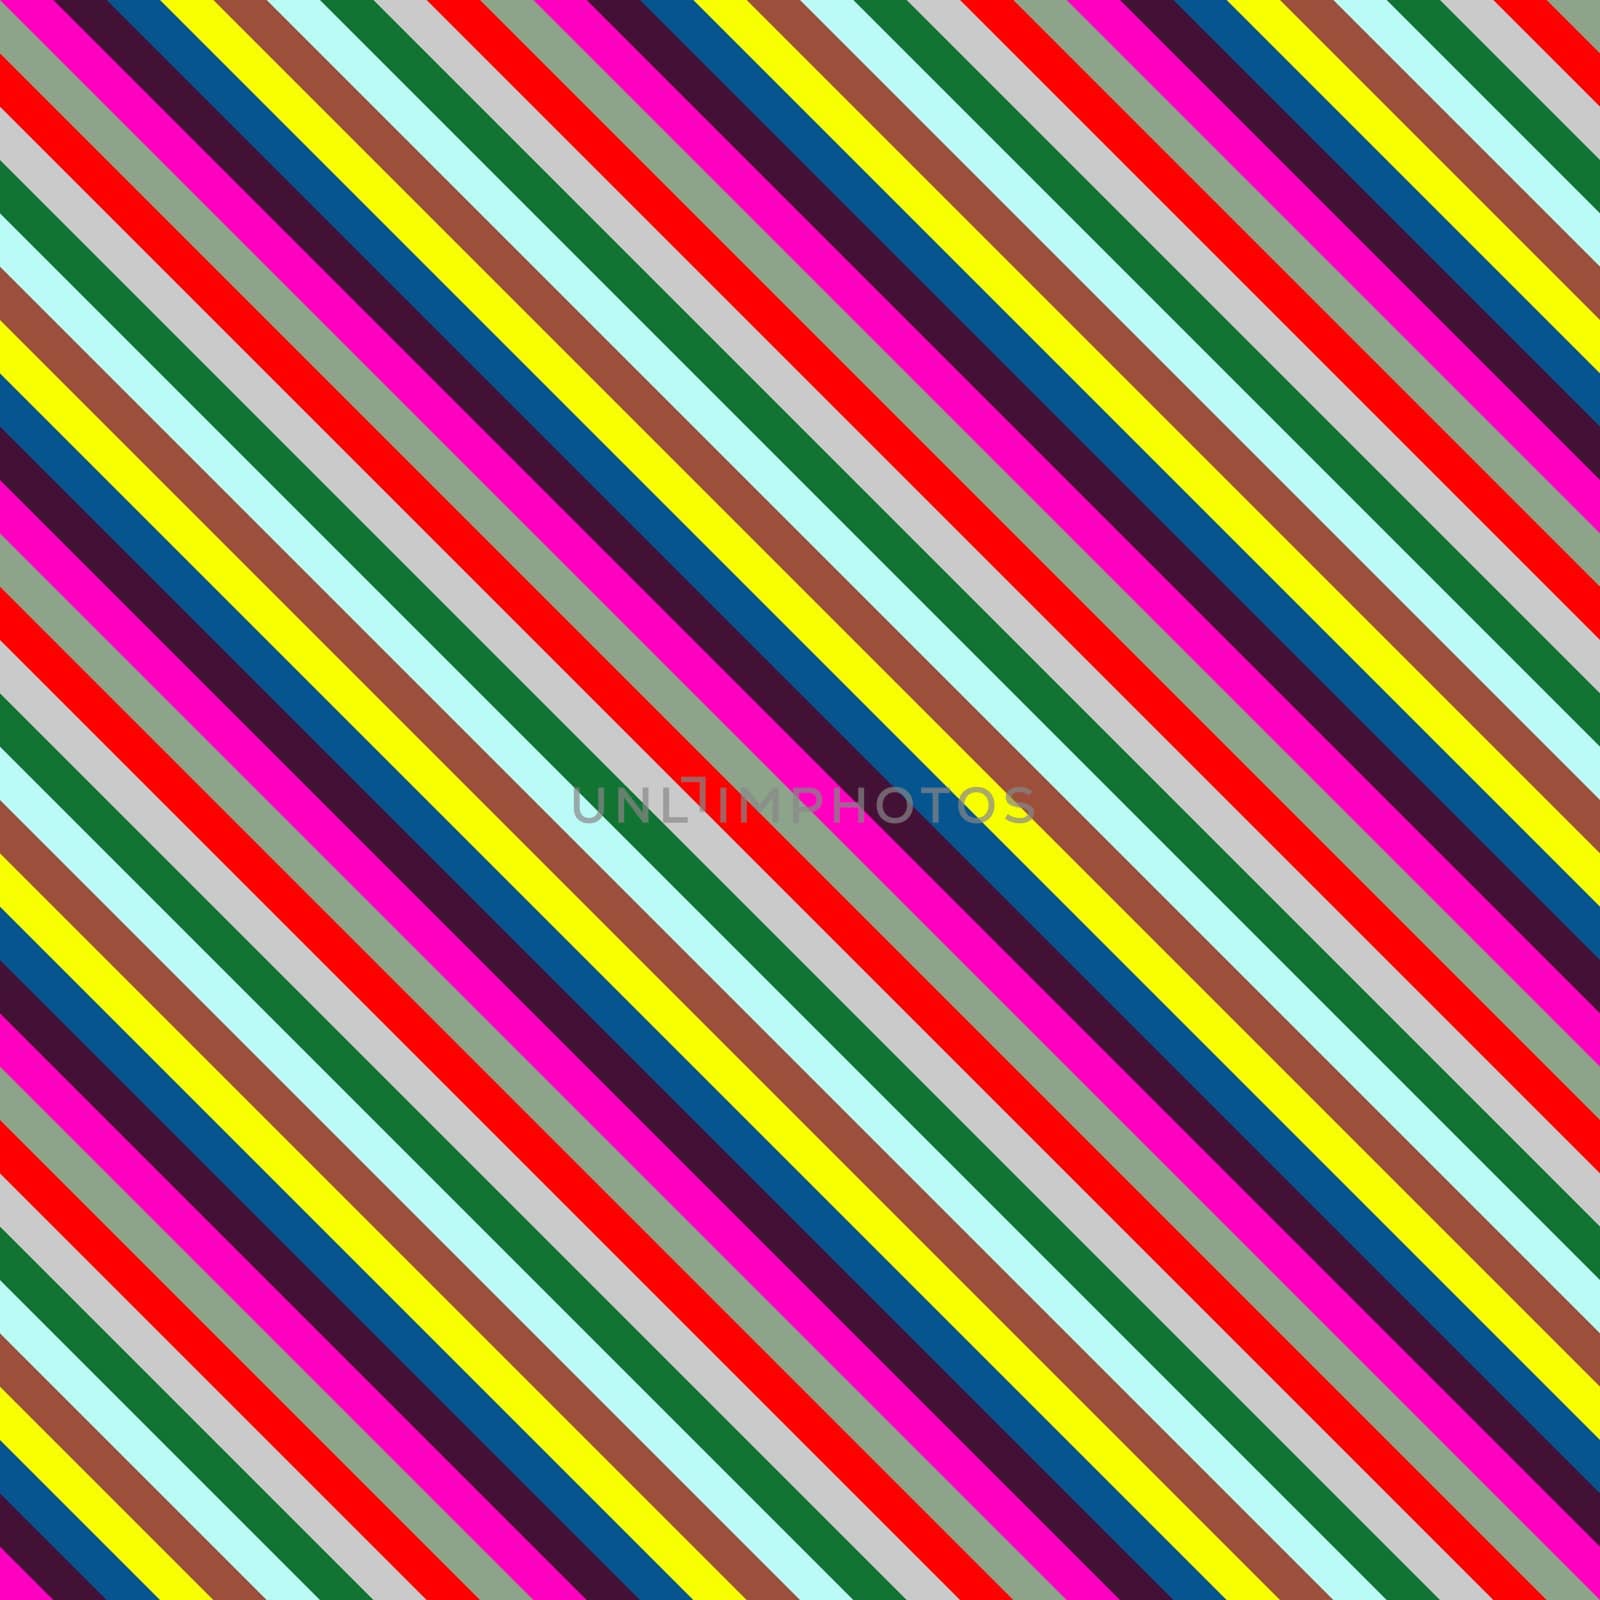 square of diogonal lines in  bright colors